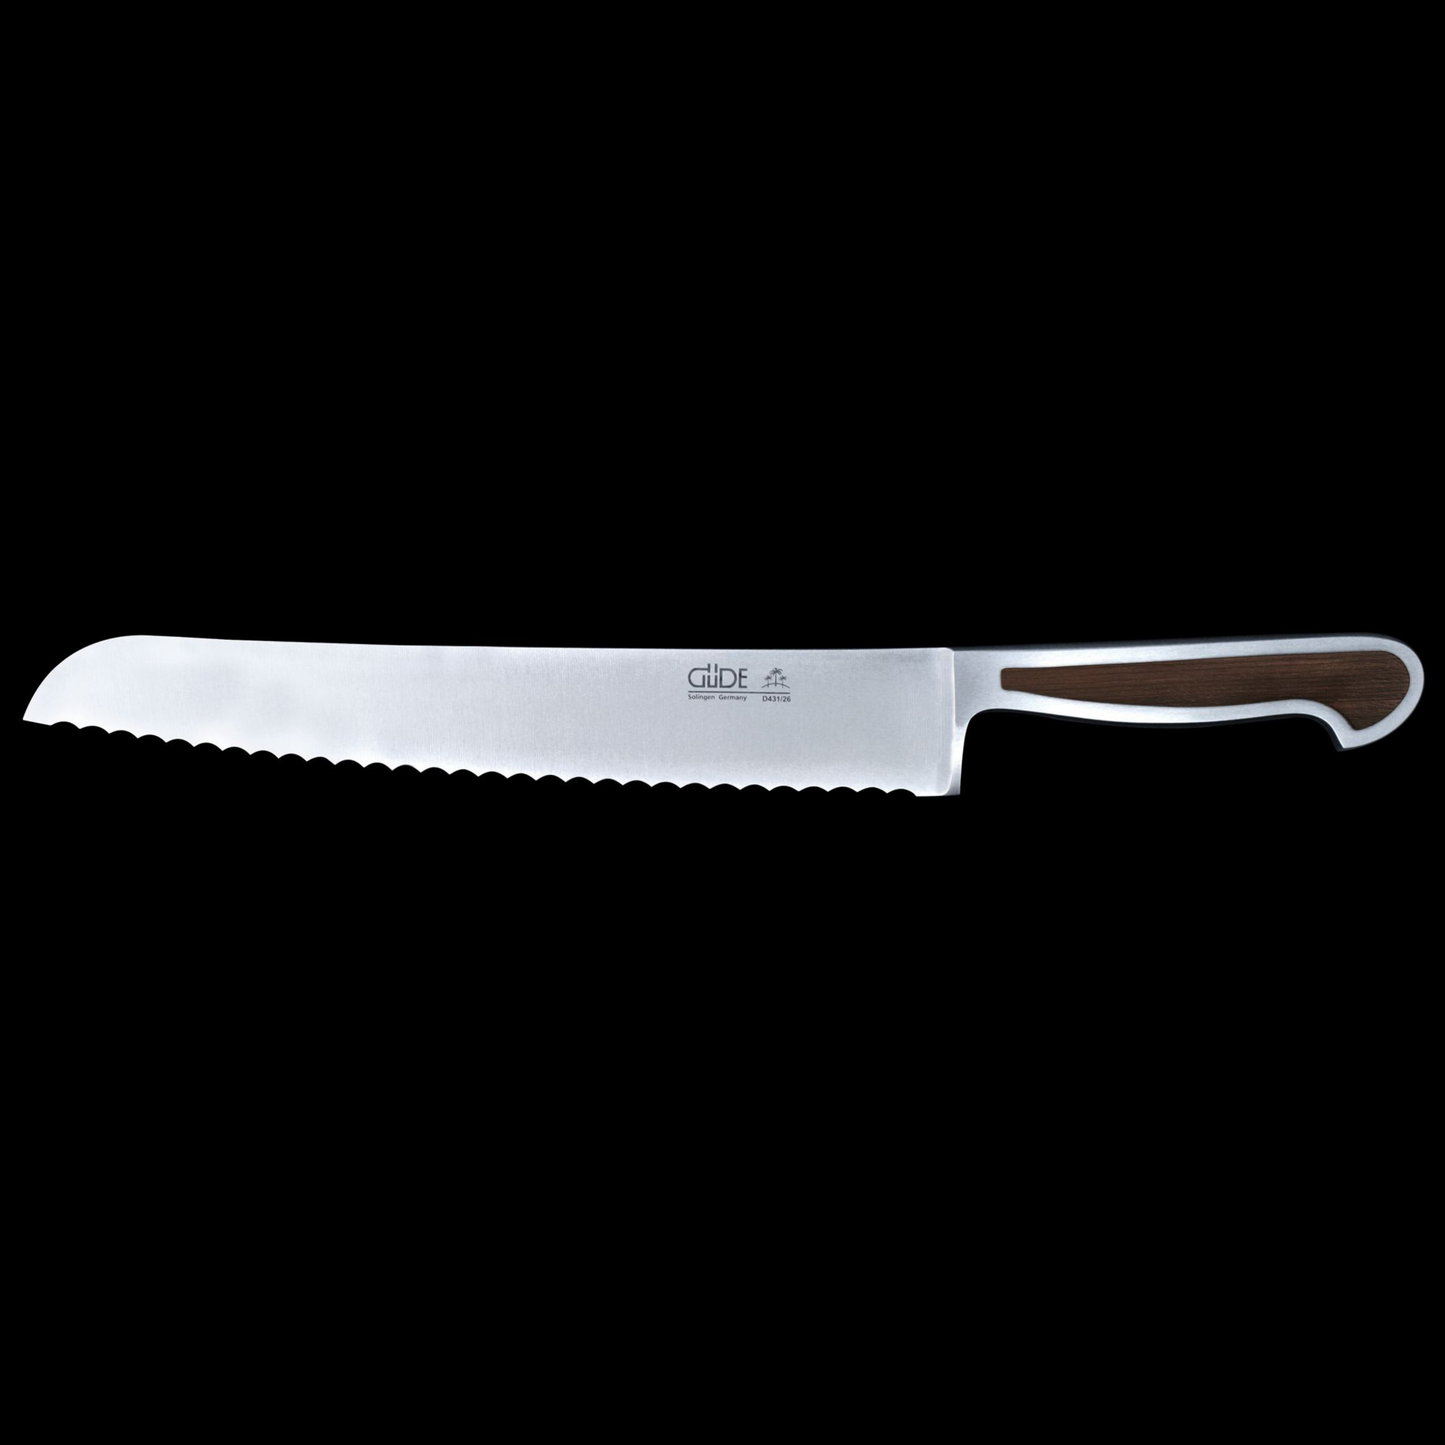 Gude Delta Series Forged Double Bolster Bread Knife 10", African Black Wood Handle and Serrated Blade - GuedeUSA